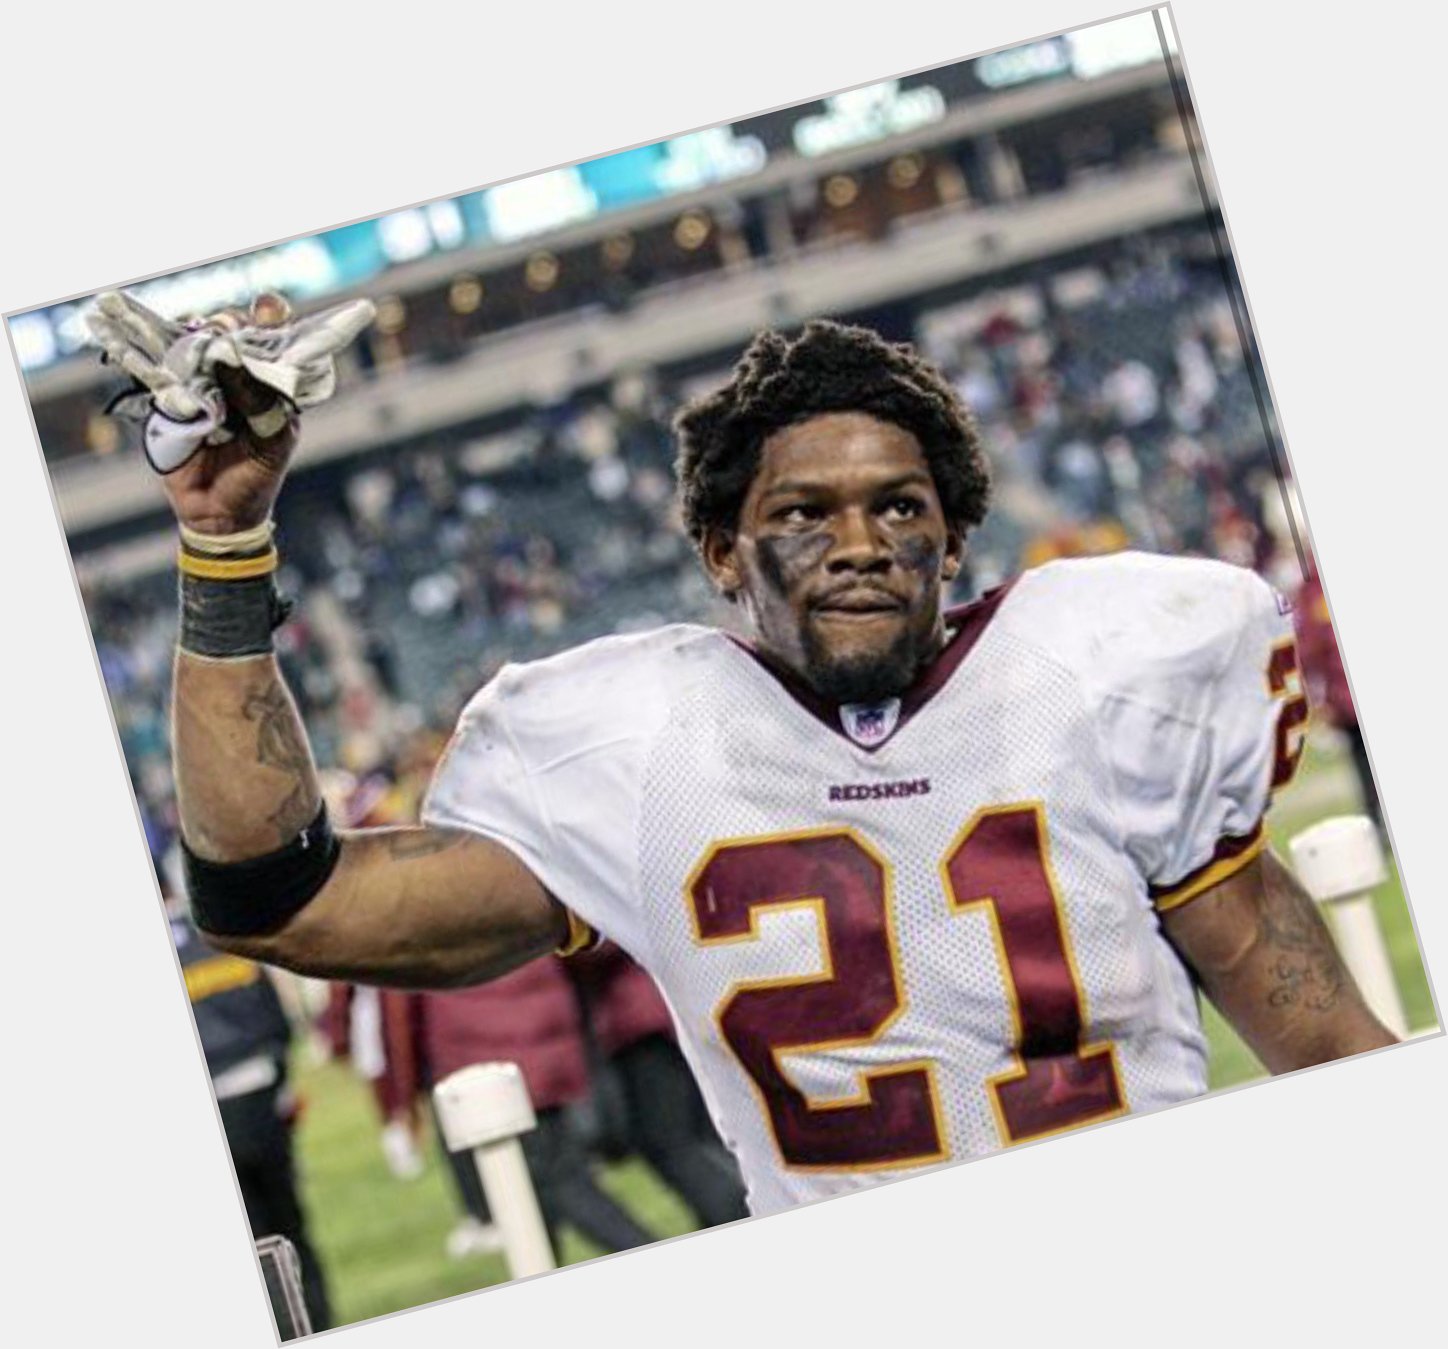 Happy birthday to the great Sean Taylor, who would have turned 35 today. 